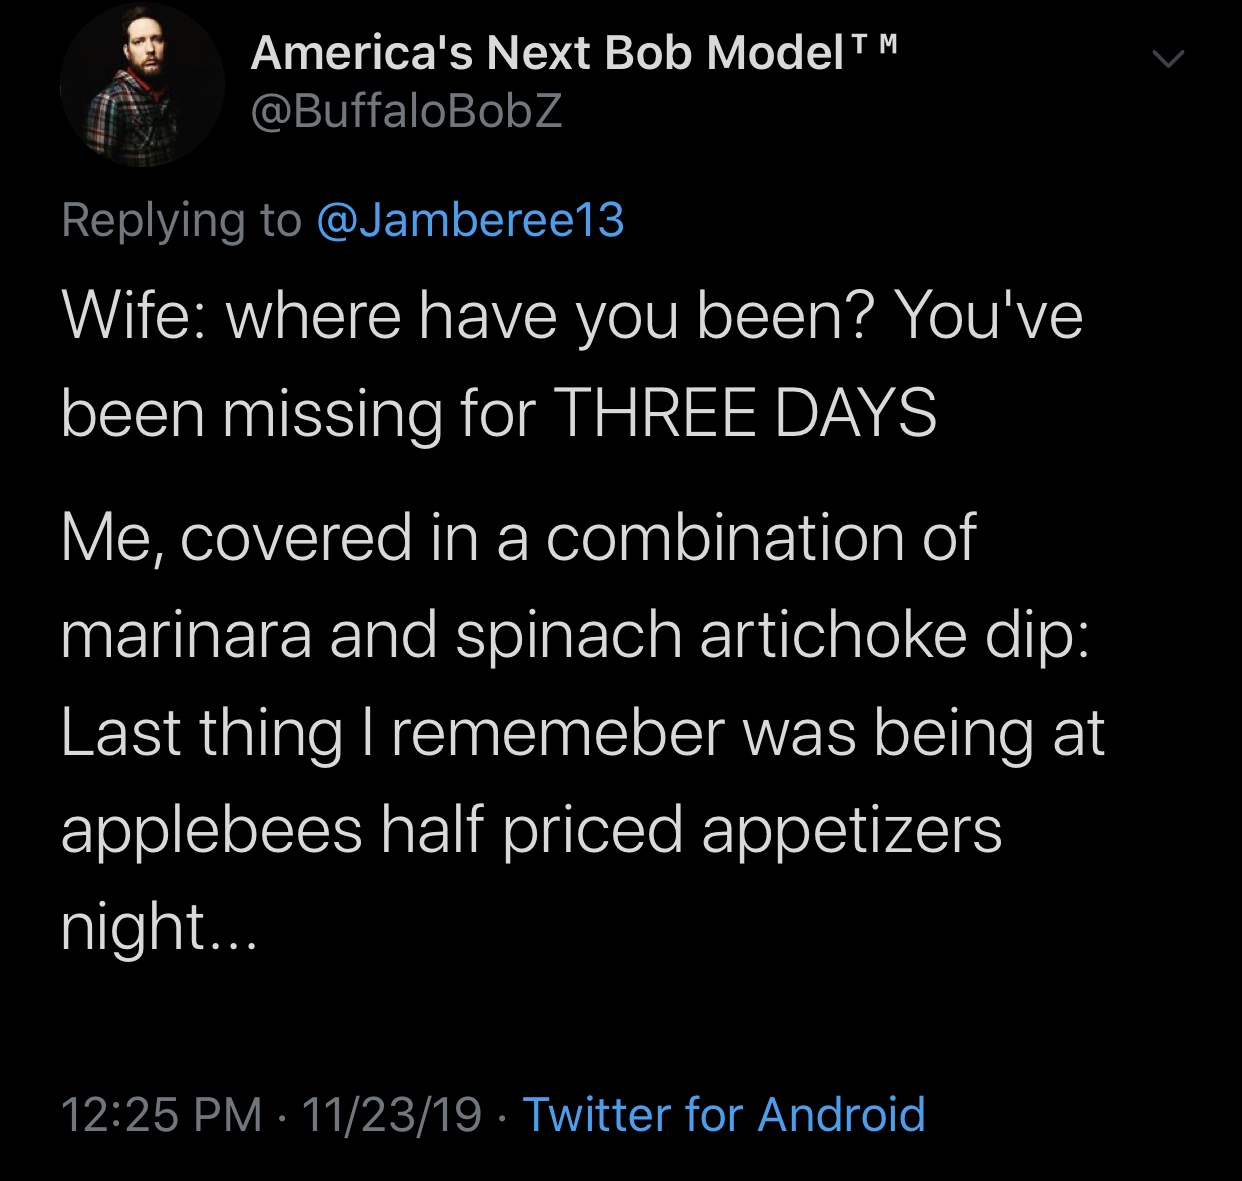 meme - video game metaphors - America's Next Bob ModelTM Wife where have you been? You've been missing for Three Days Me, covered in a combination of marinara and spinach artichoke dip Last thing I rememeber was being at applebees half priced appetizers n